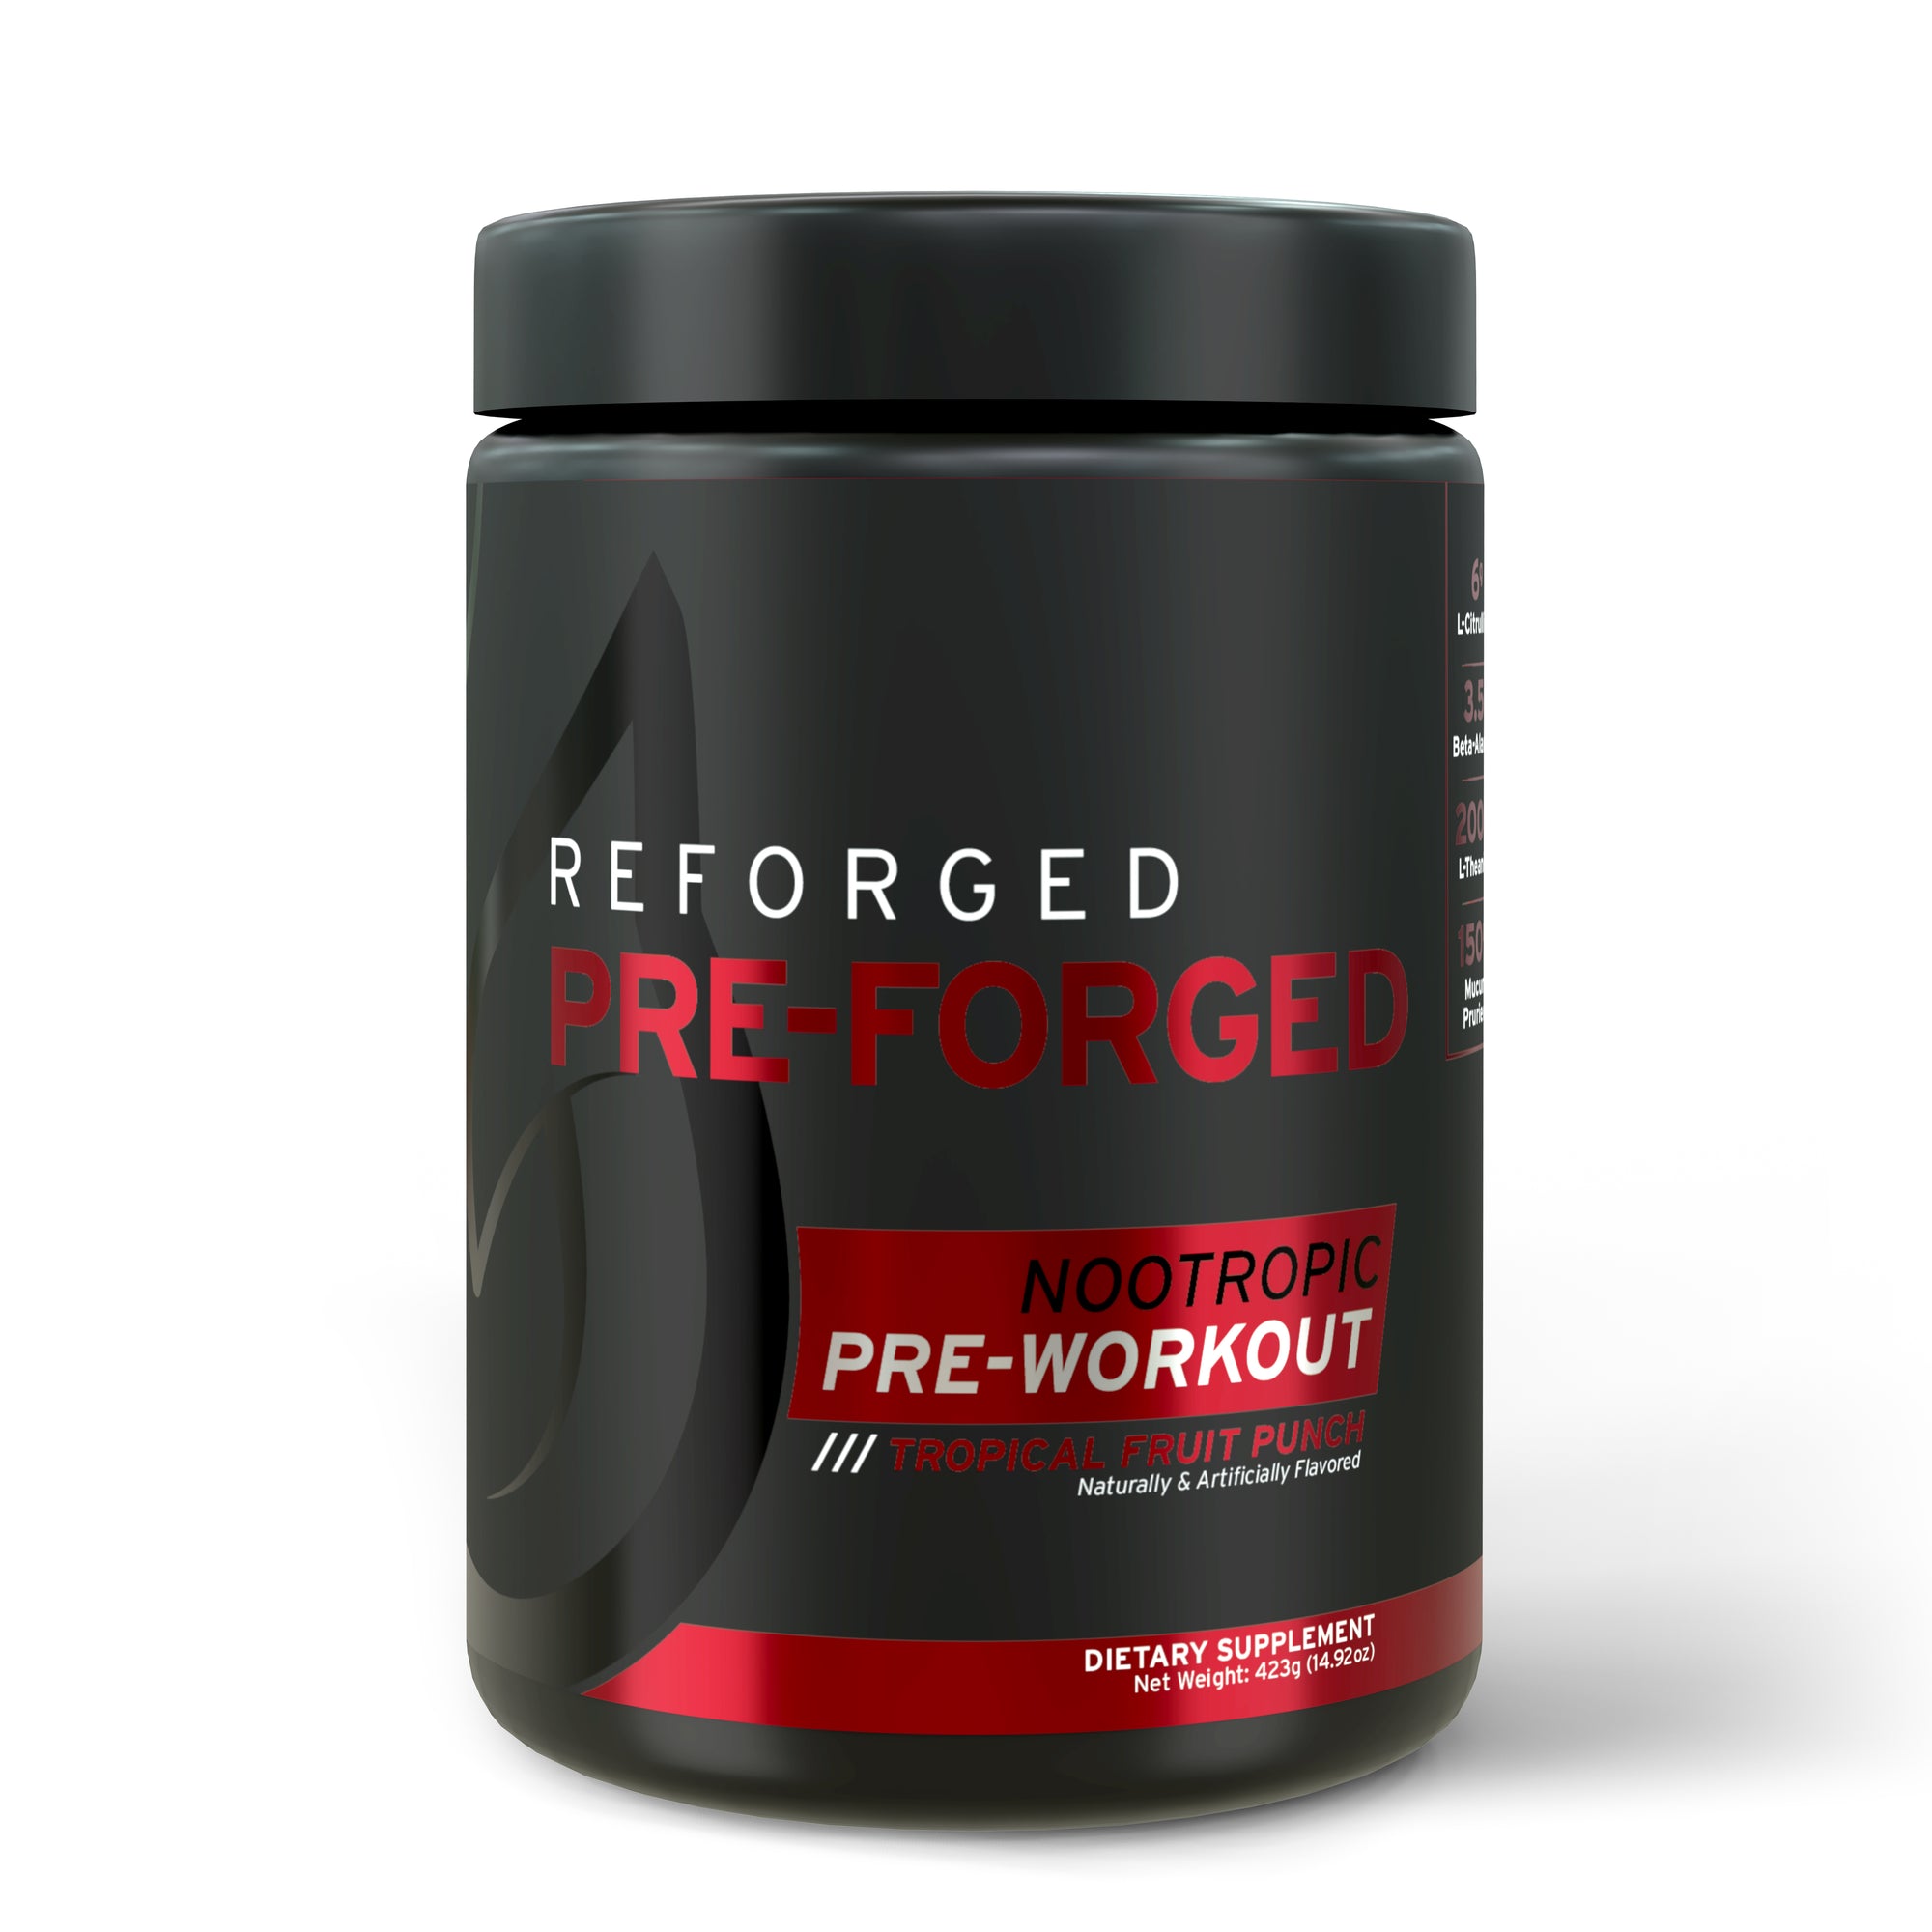 Pre-Forged Pre-Workout - Reforged